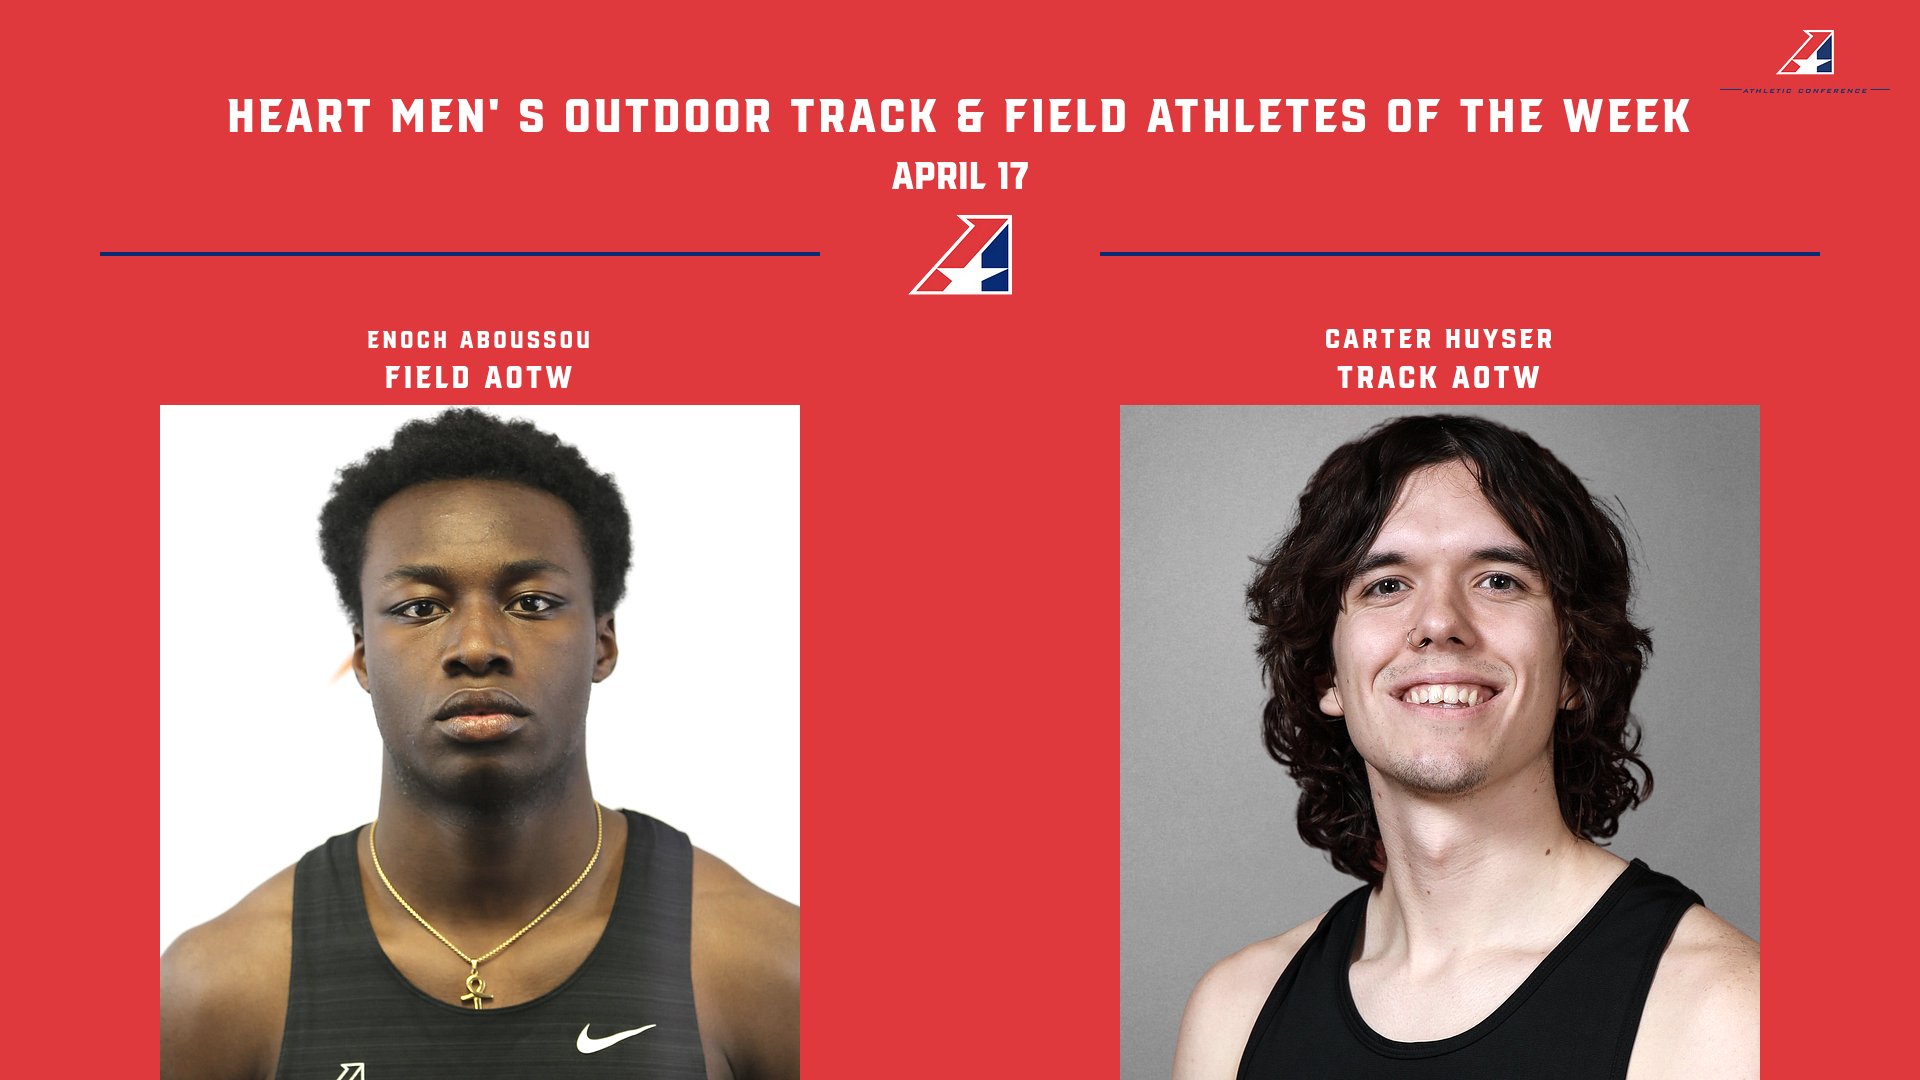 Missouri Valley’s Aboussou, Grand View’s Huyser Collect Heart Men’s Outdoor Honors